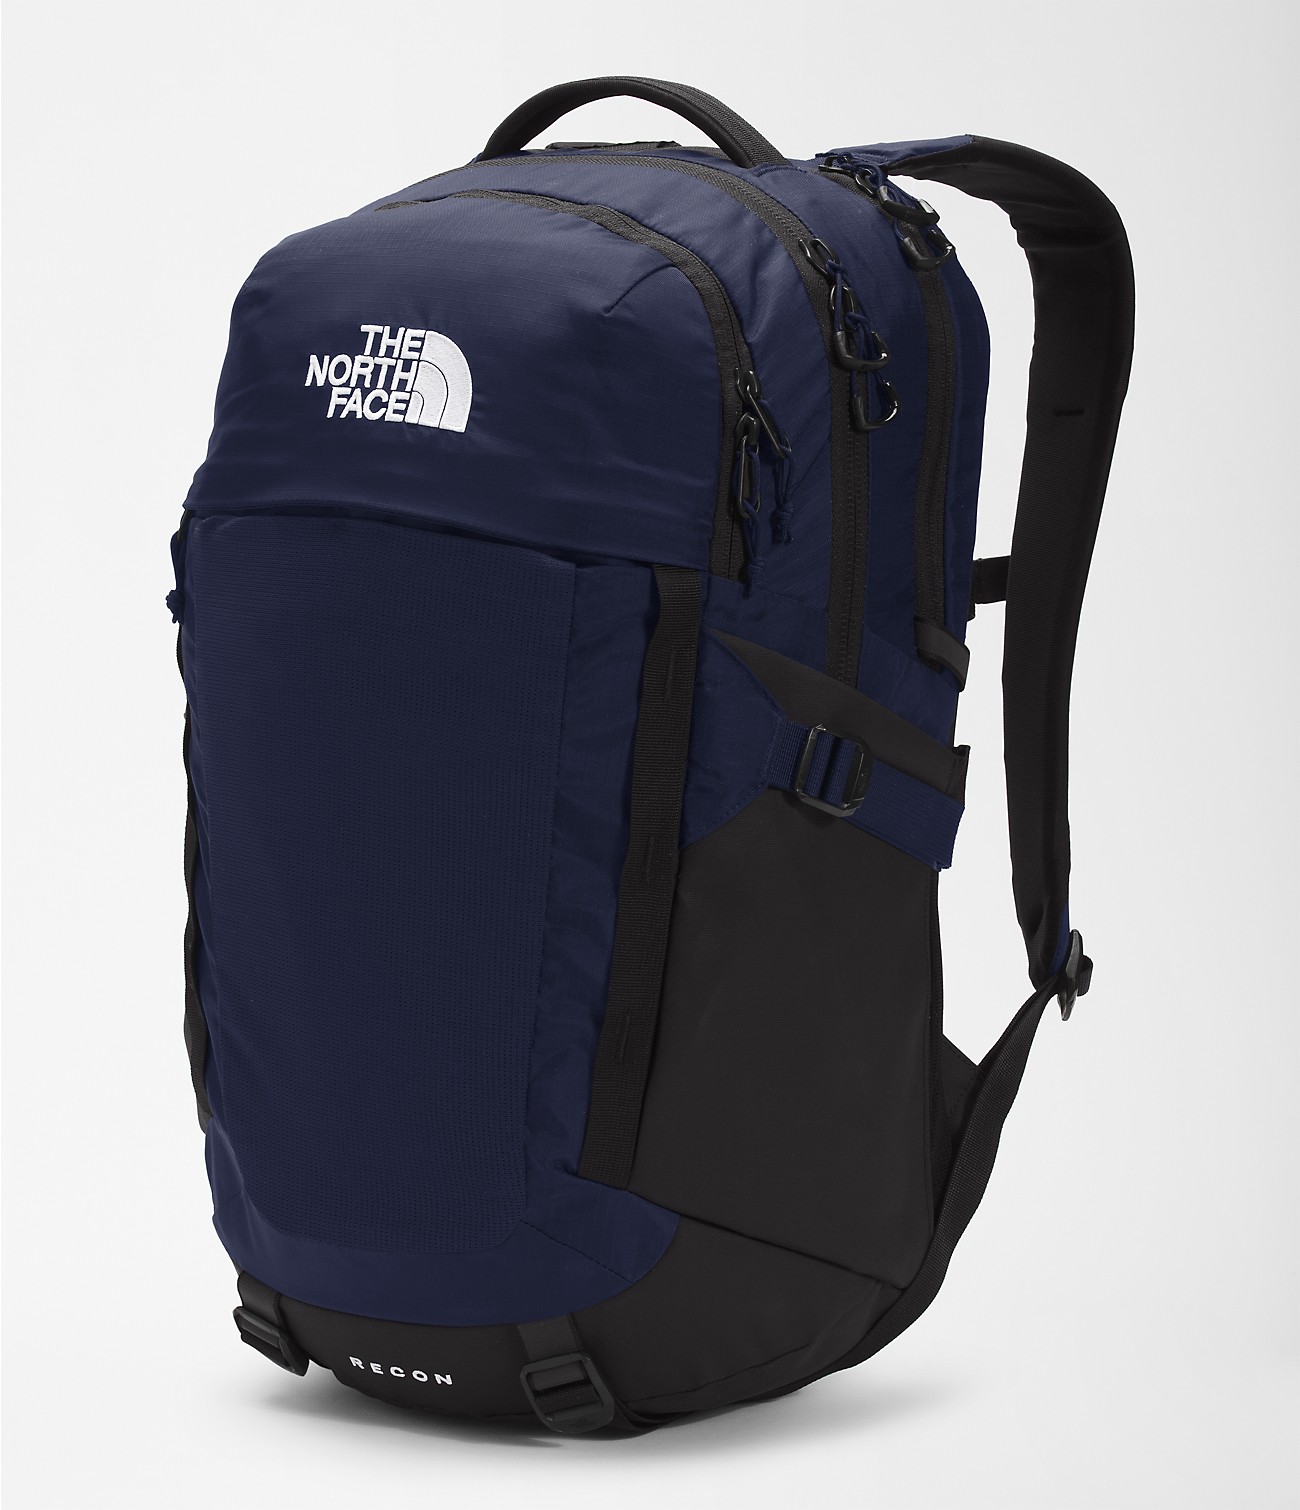 Unlock Wilderness' choice in the Osprey Vs North Face comparison, the Recon Backpack by The North Face